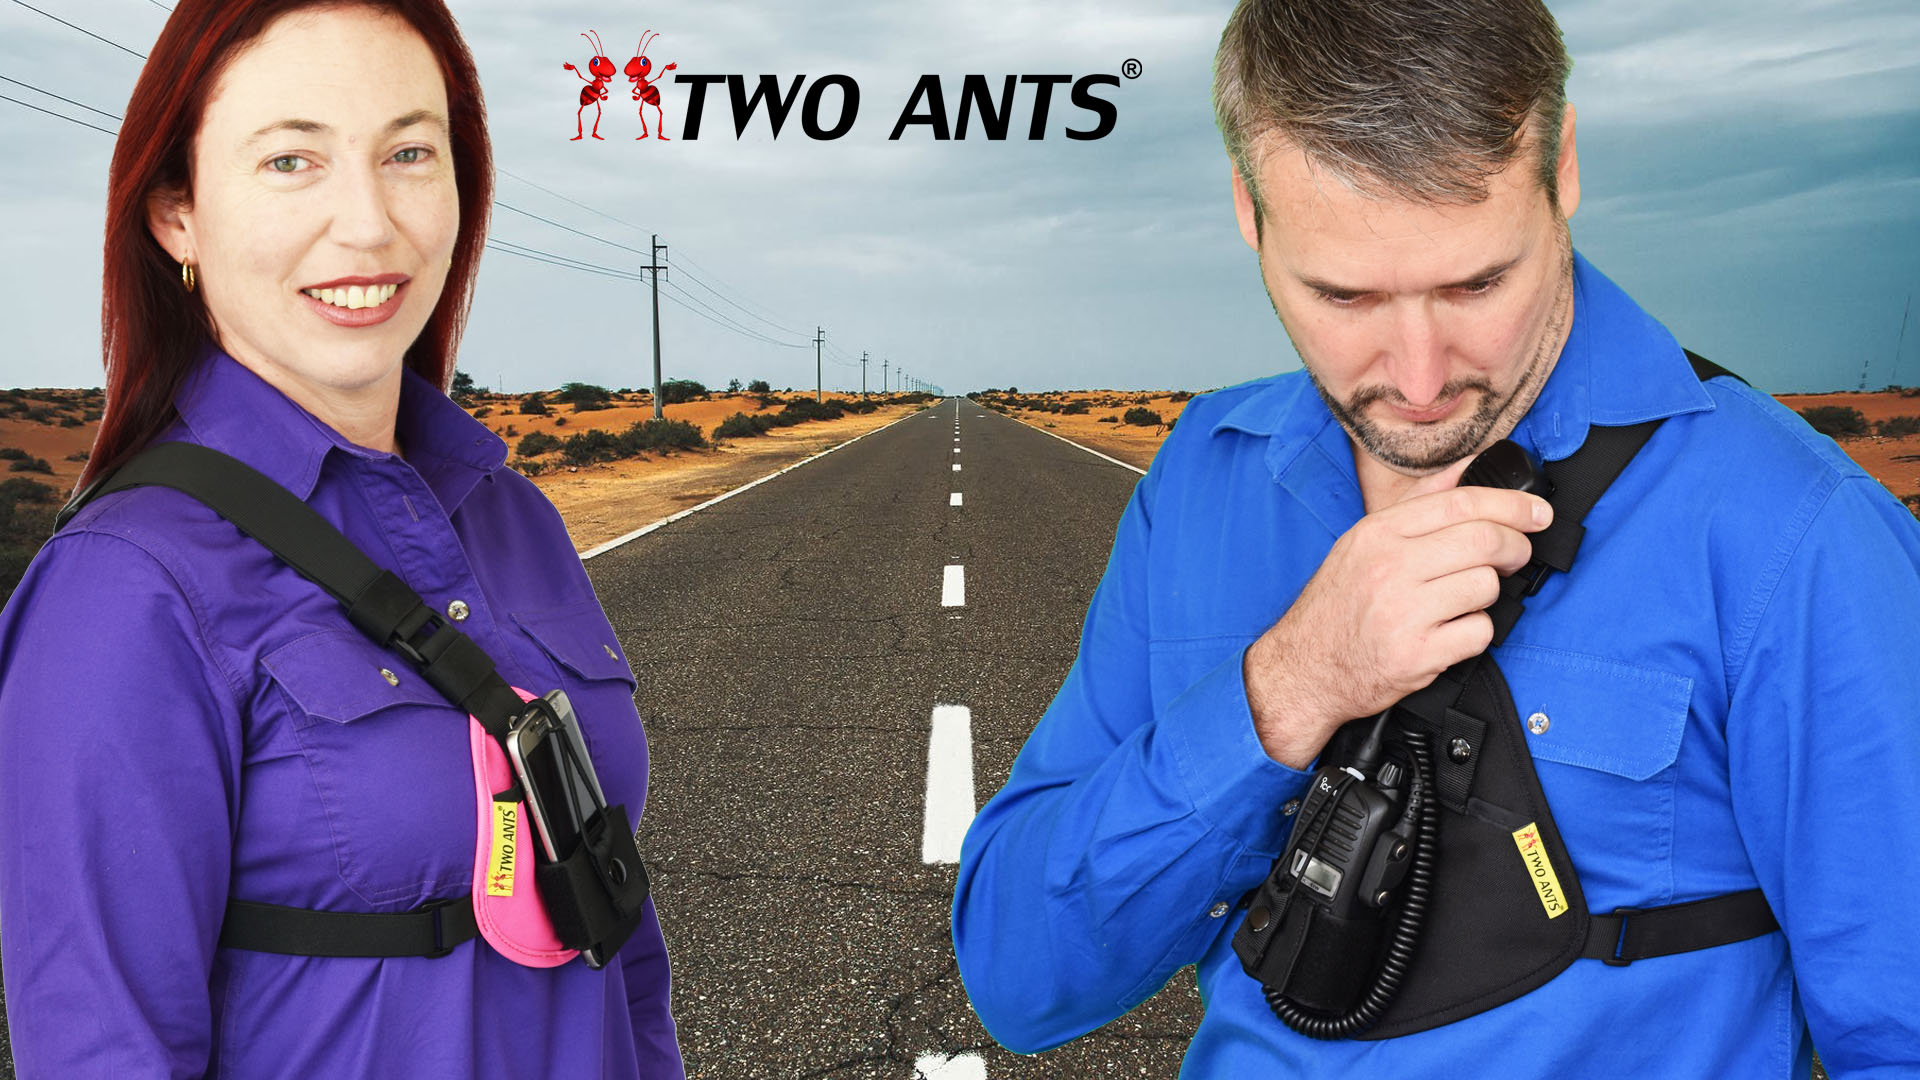 Where to buy Two Ants Gear